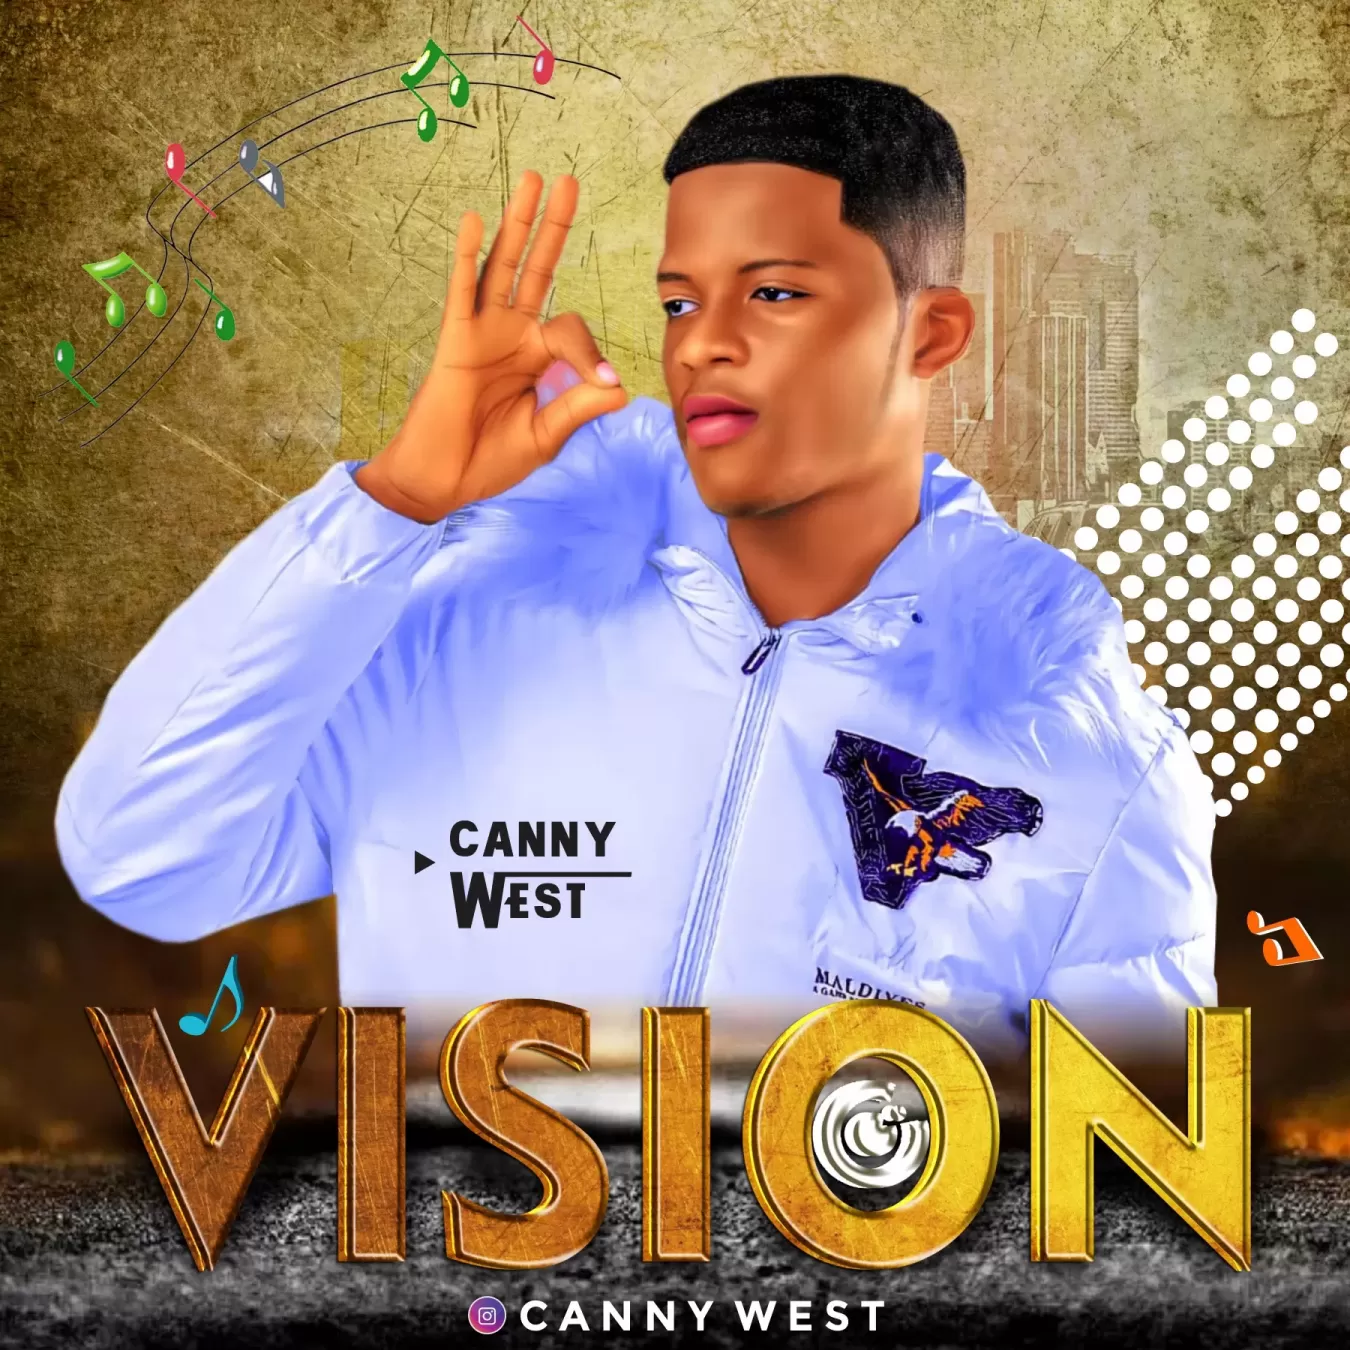 Cannywest - Vision